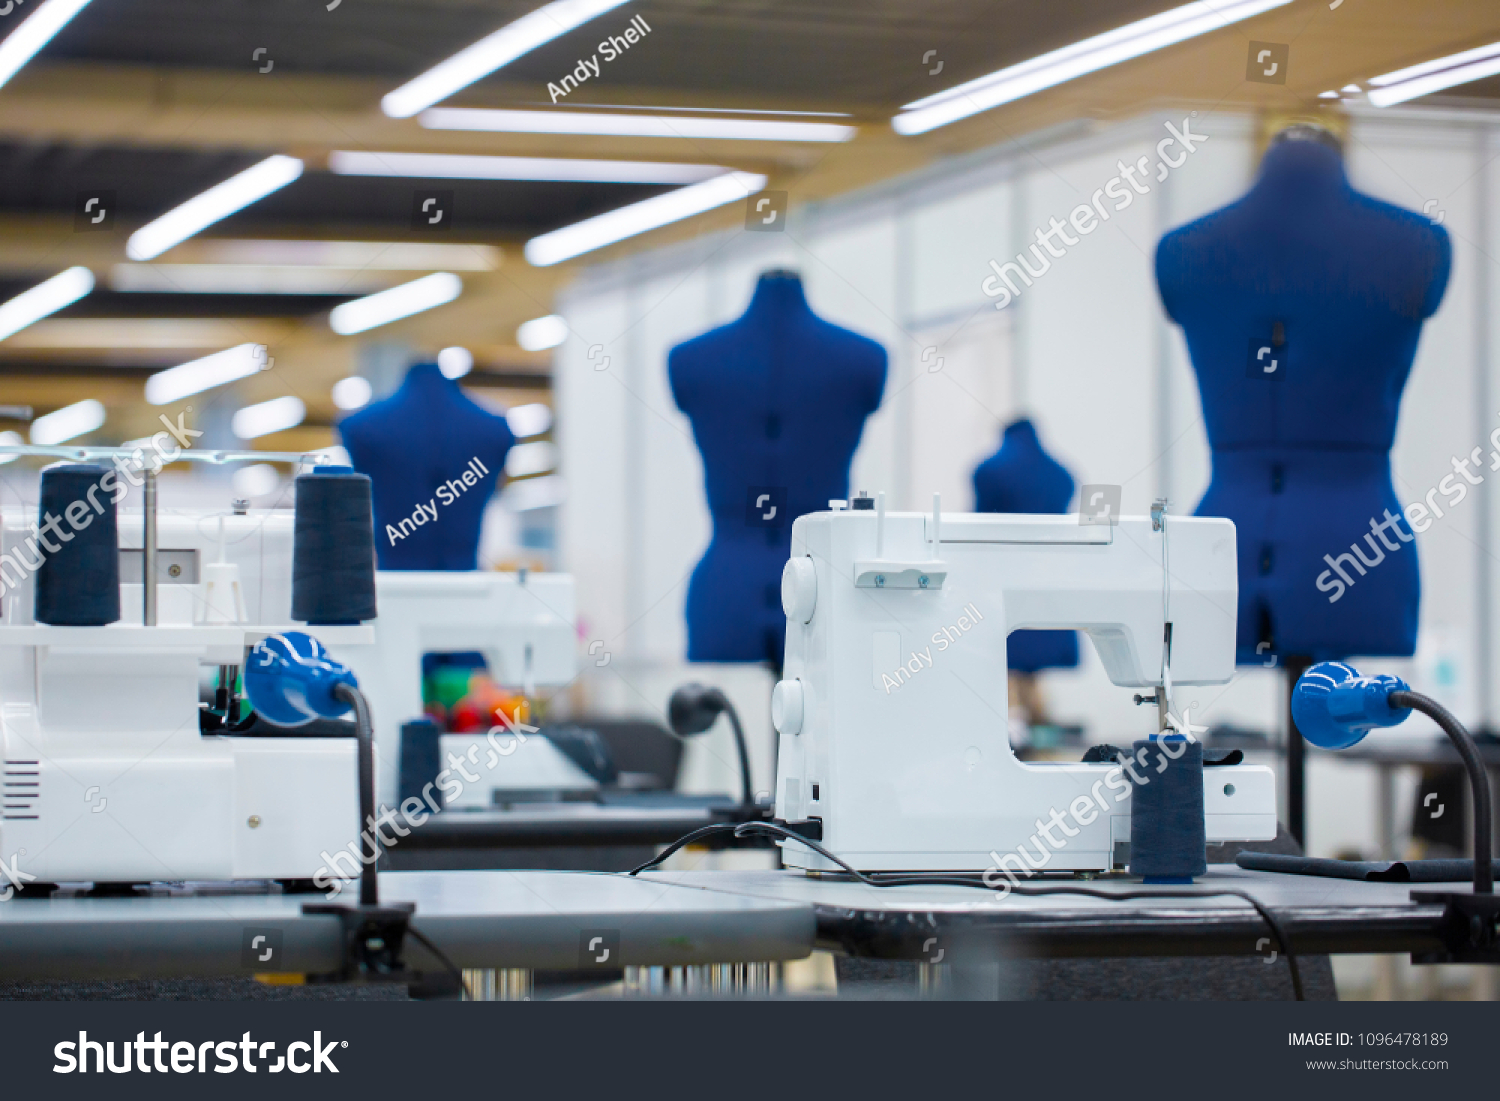 Interior of garment factory . Closes making atelier with several sewing machines. Tailoring industry, fashion designer workshop, industry concept #1096478189